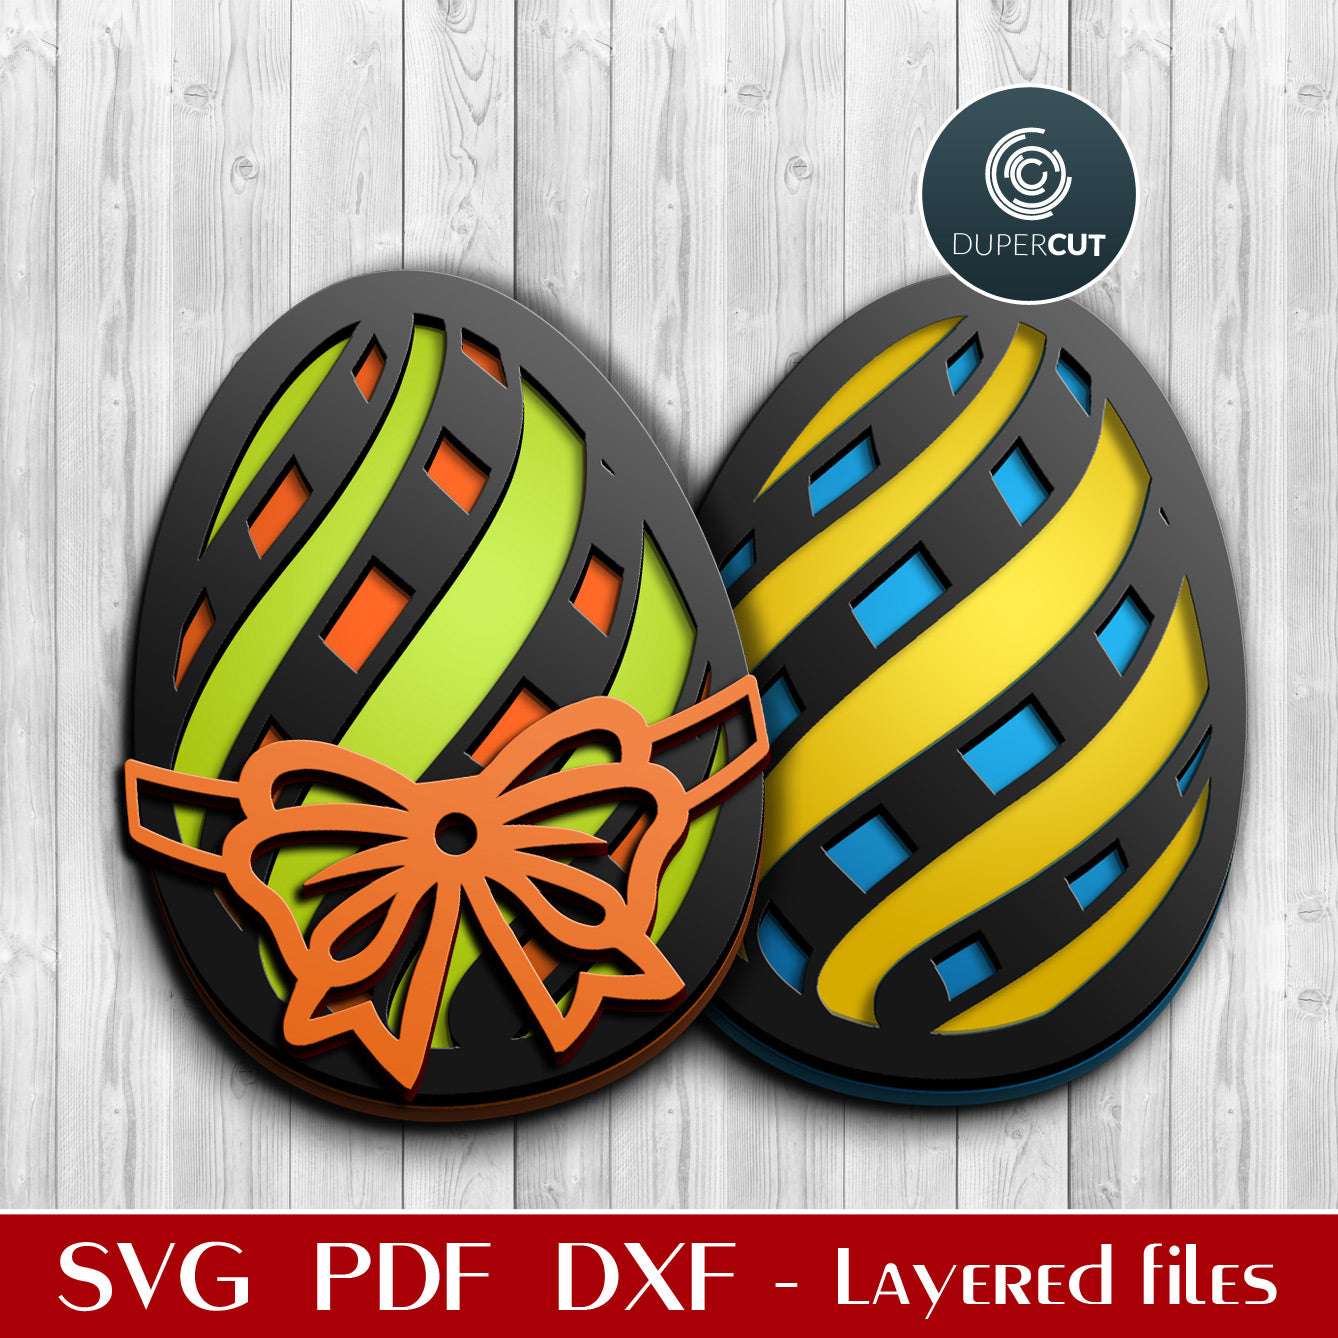 Easter egg with stripes and a bow DIY decoration - SVG DXF layered cutting files for Glowforge, Cricut, Silhouette Cameo, scroll saw by DuperCut.com